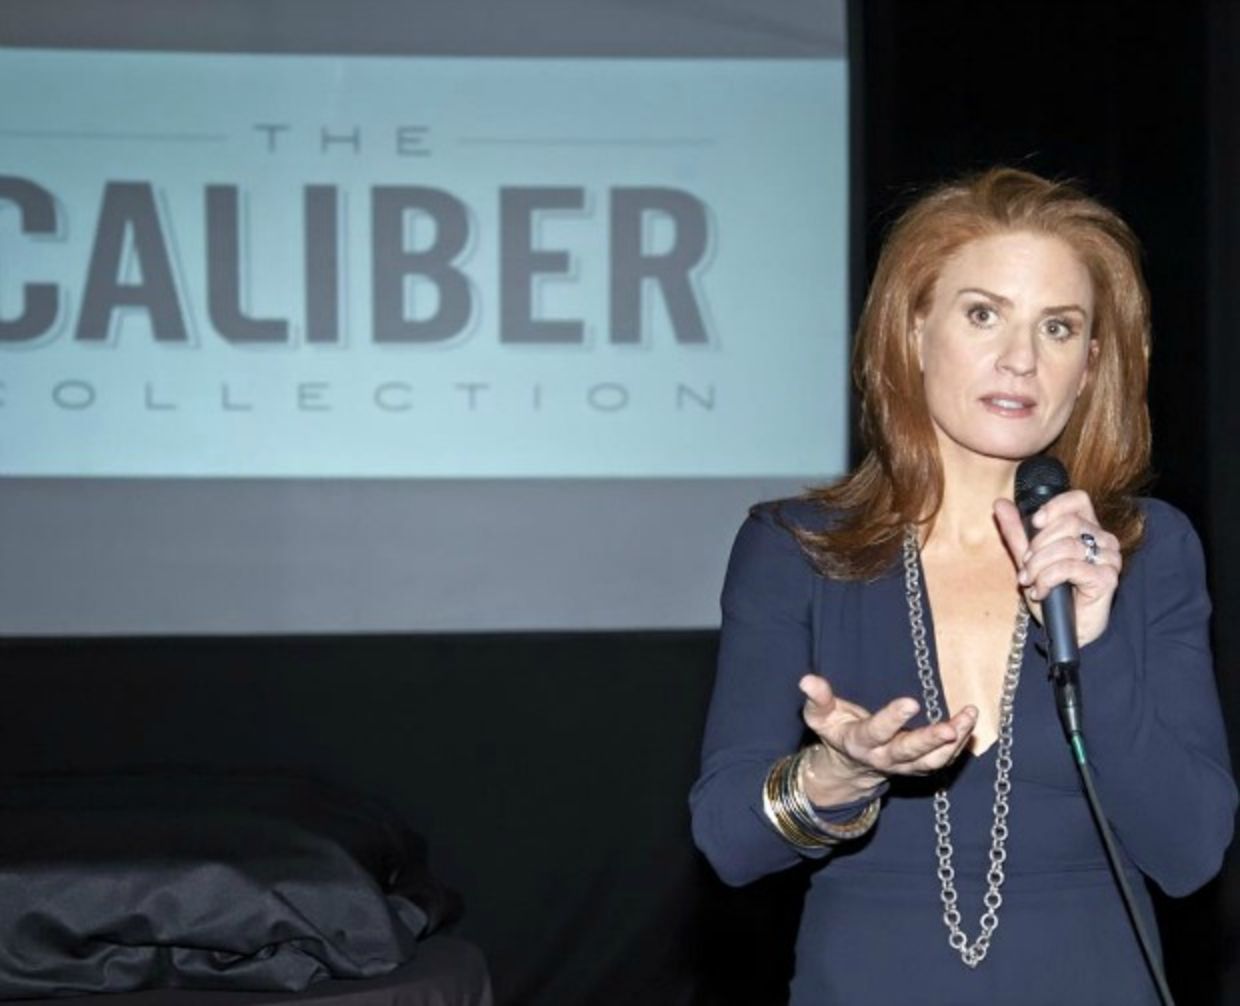 Jessica Mindich speaks at event for The Caliber Collection